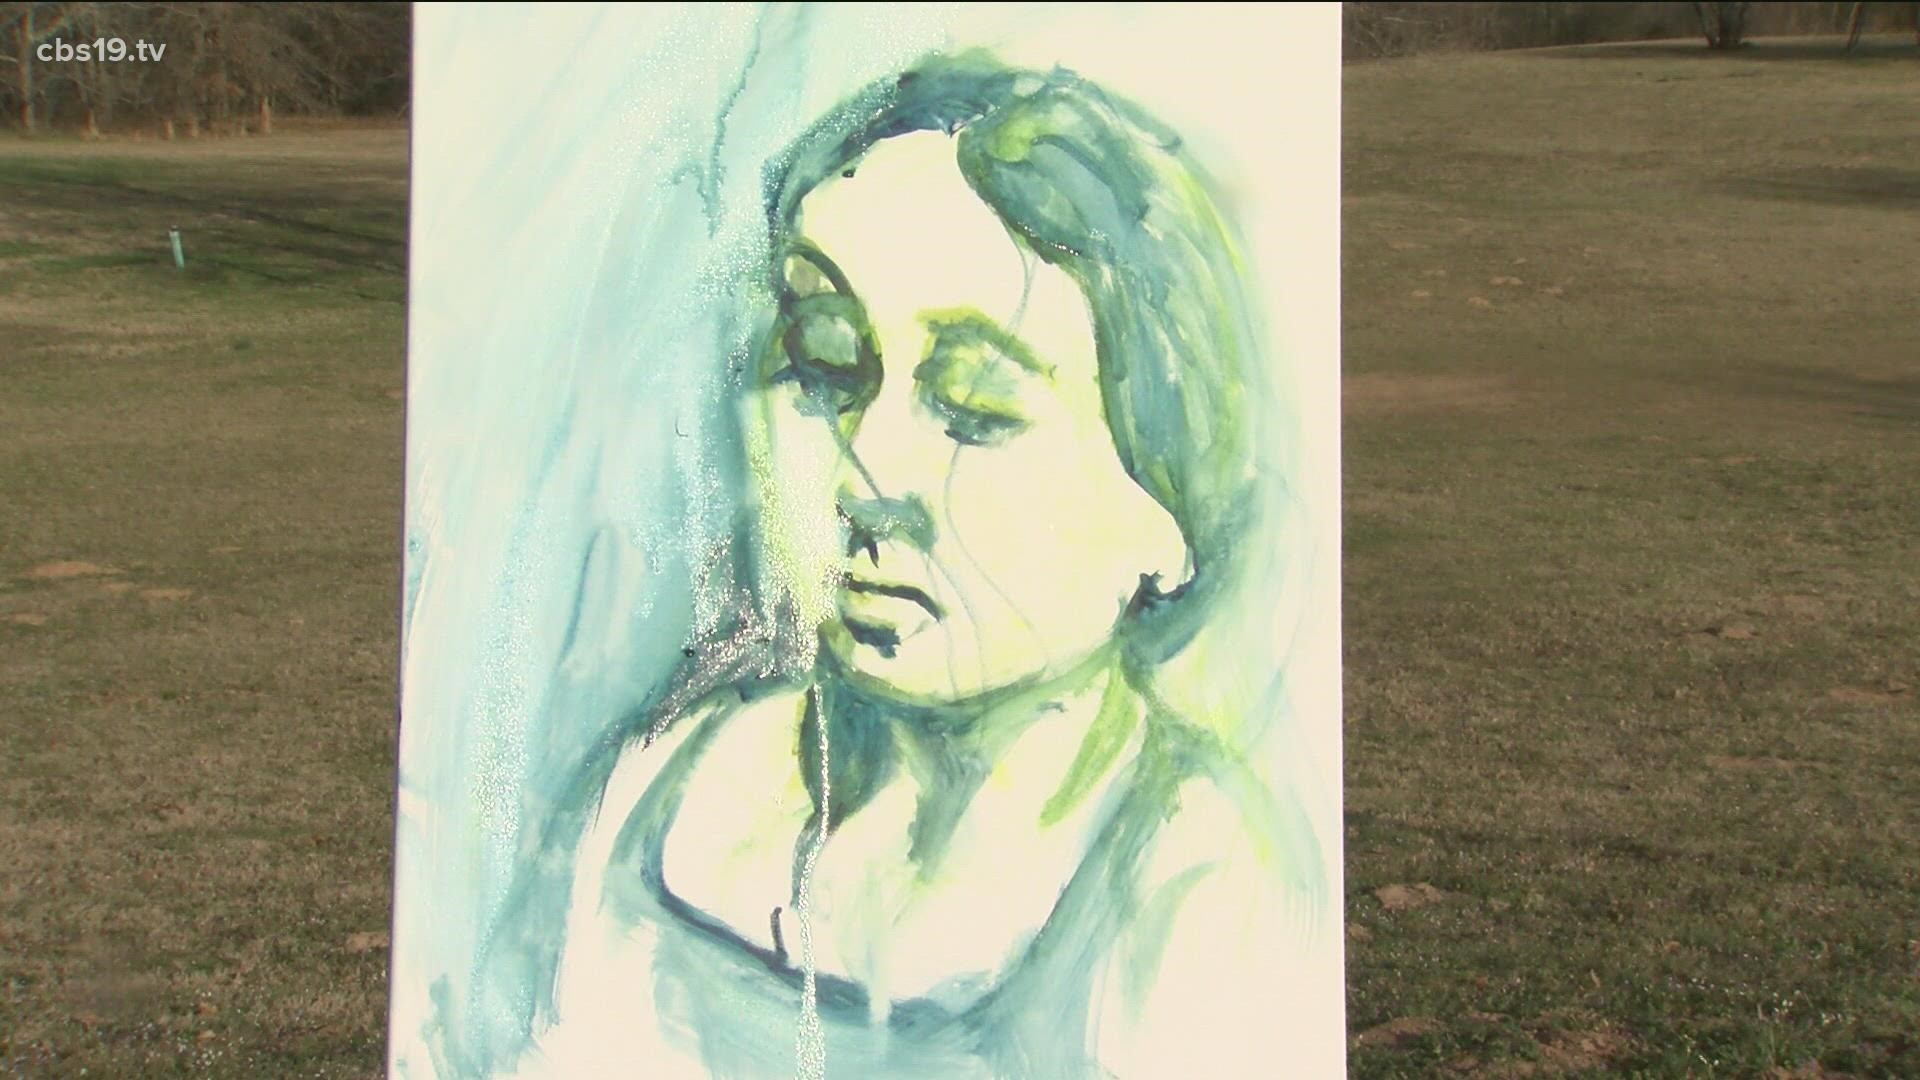 East Texas resident to go head-to-head among fellow artists in national competition